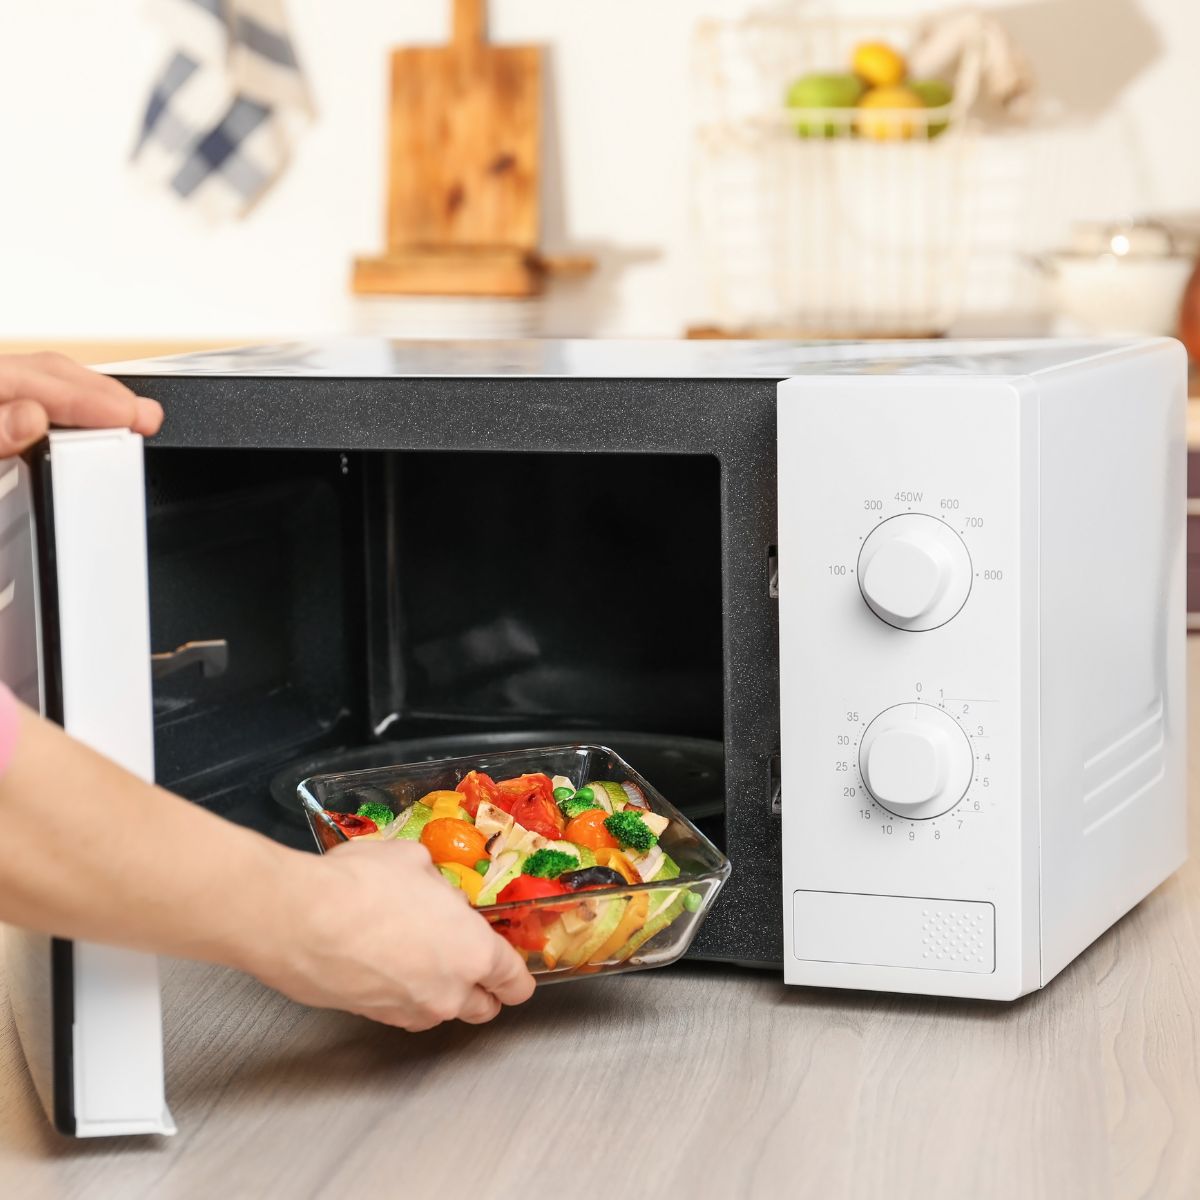 a person placing a bowl of vegetables in a microwave oven